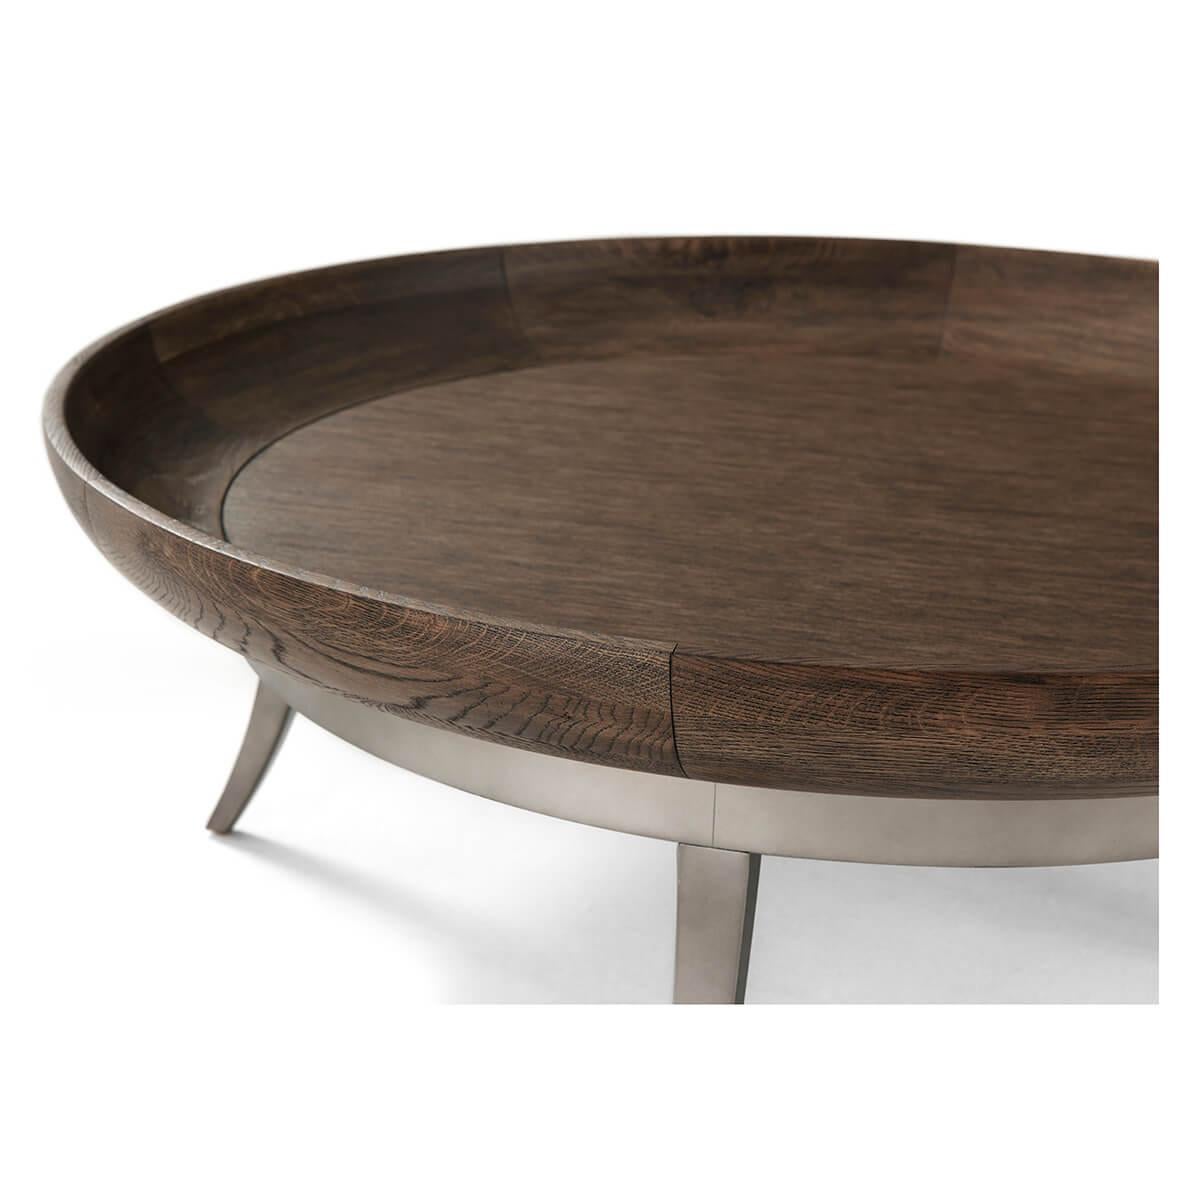 Vietnamese Dark Rimmed Bowl Top Coffee Table For Sale